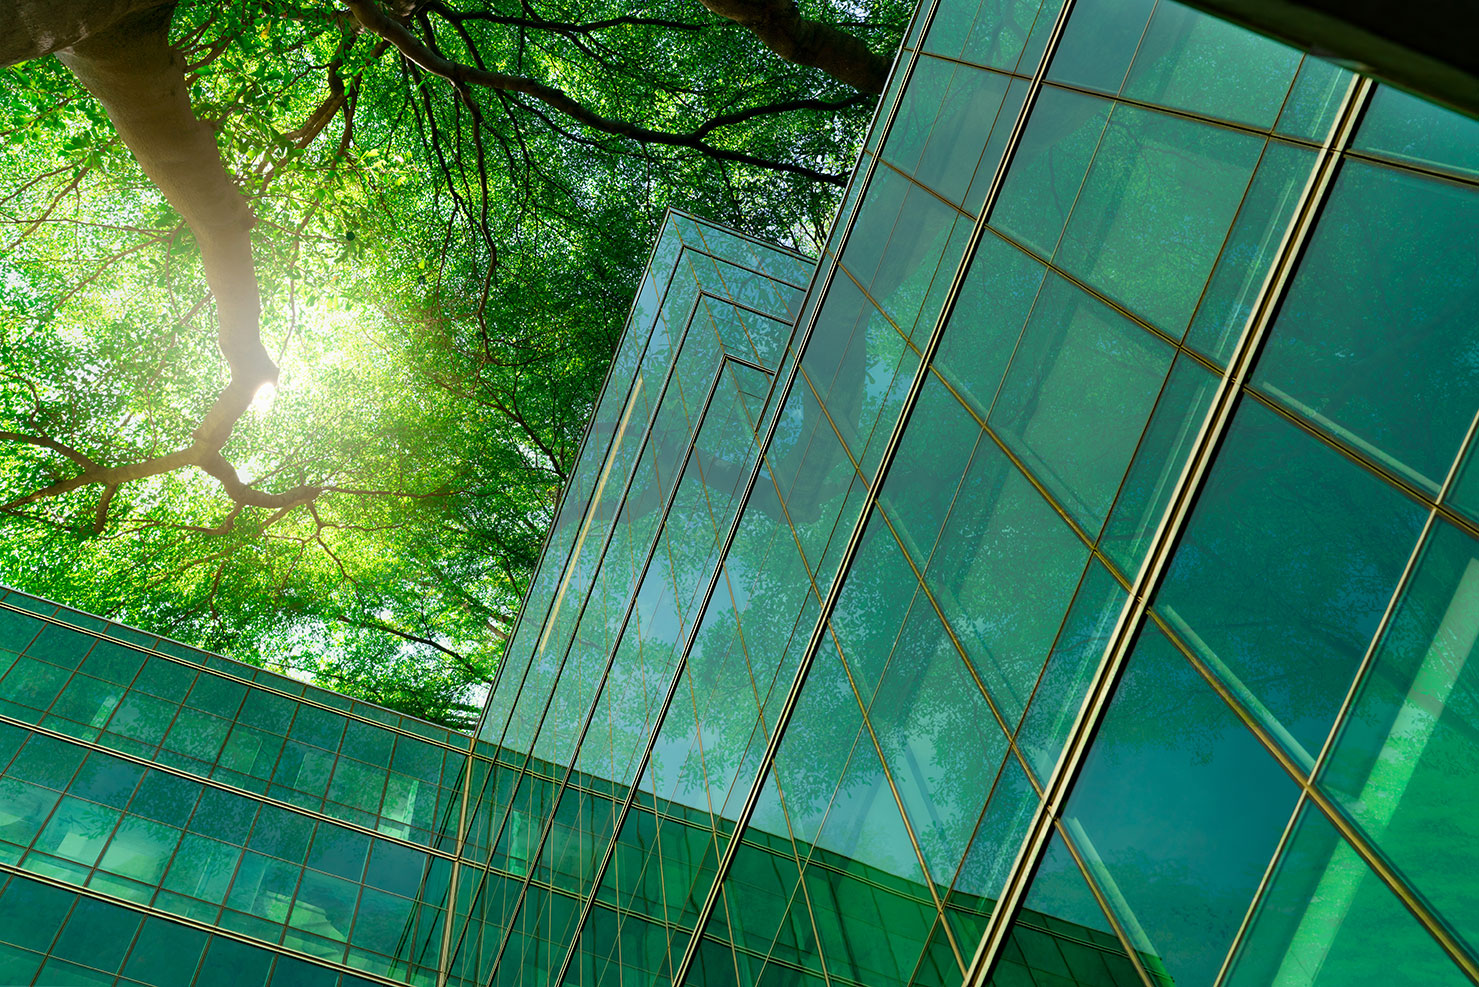 Office building reflecting the greenery of the trees